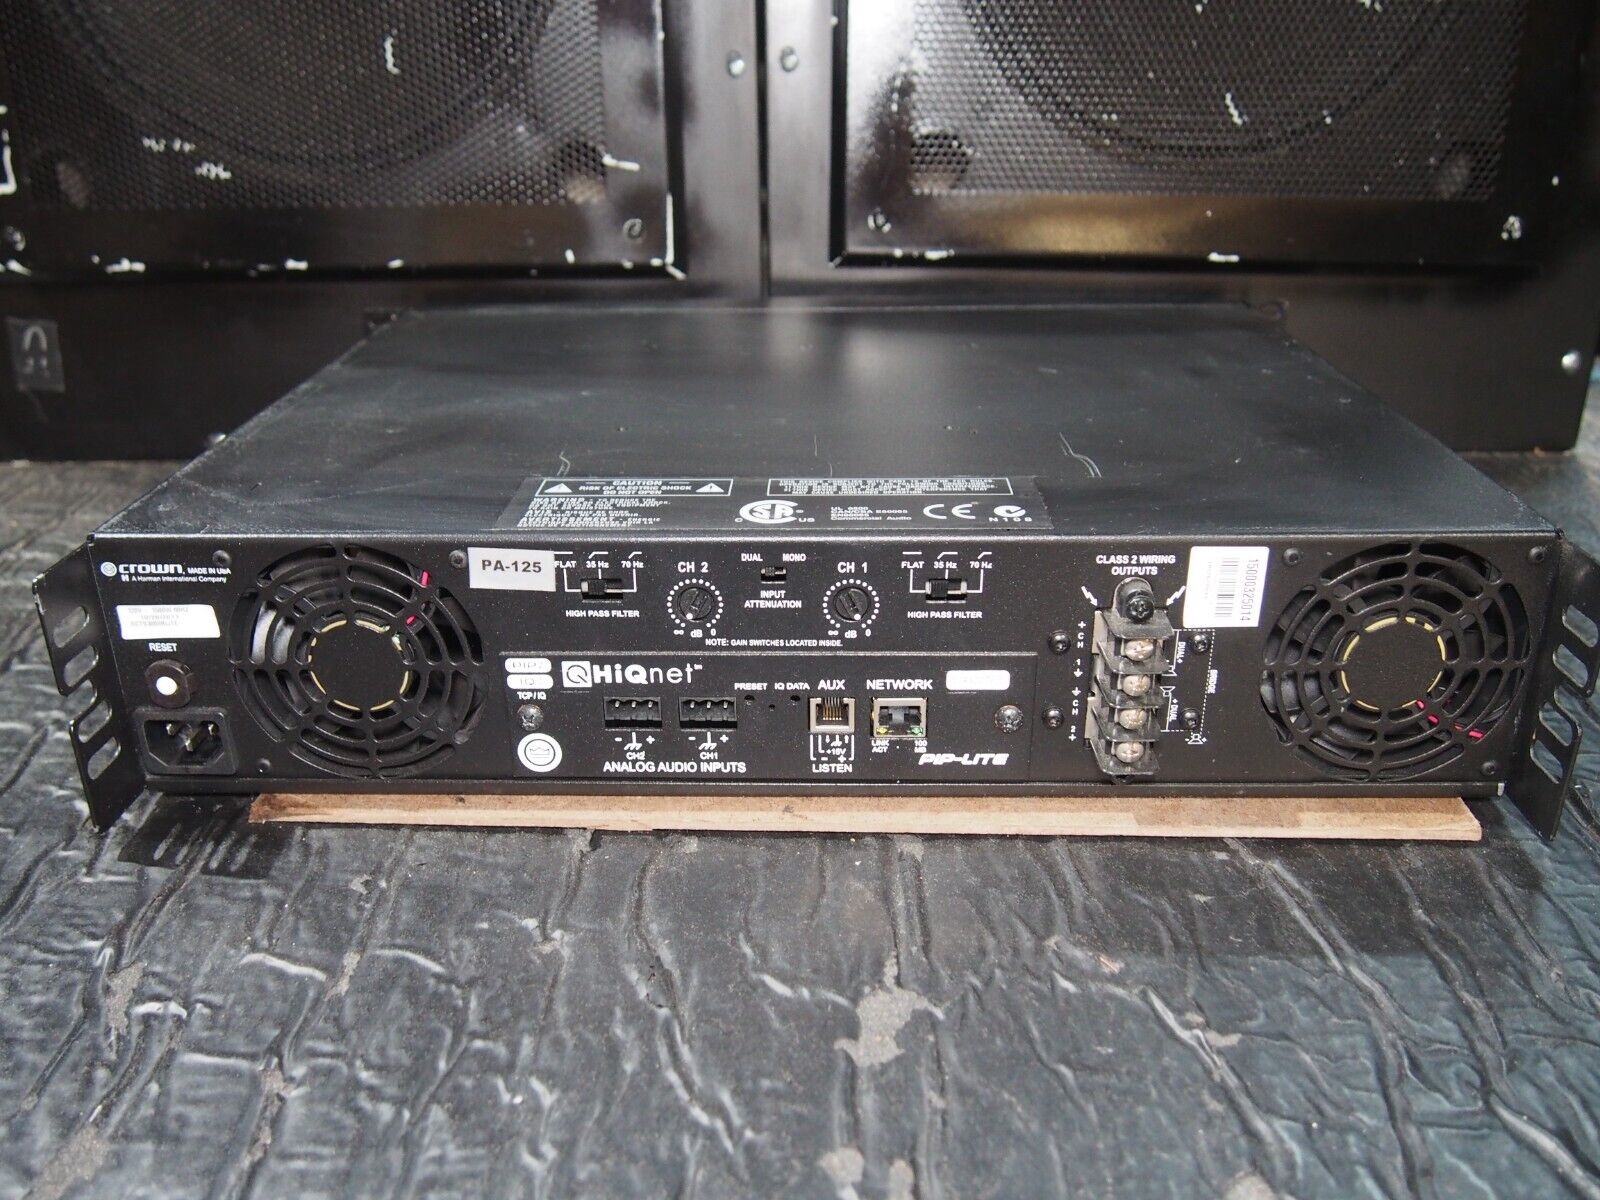 Crown Cts3000 2 Channel Amp Tested Clean Working!! Hiqnet Pip-lite Dsp